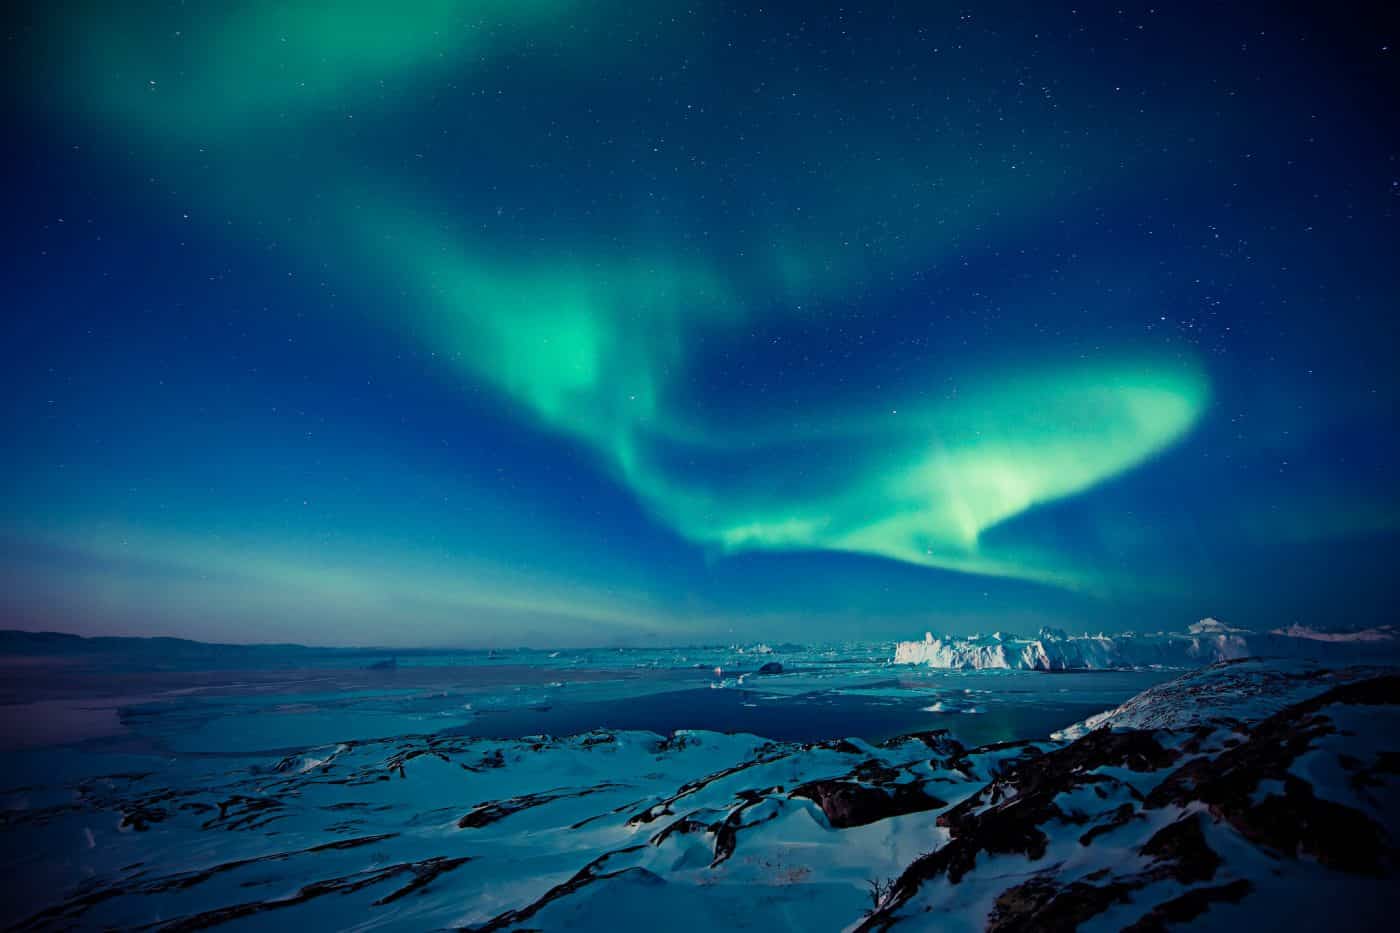 Northern lights over the Ilulissat Icefjord. Photo by Andre Schoenherr